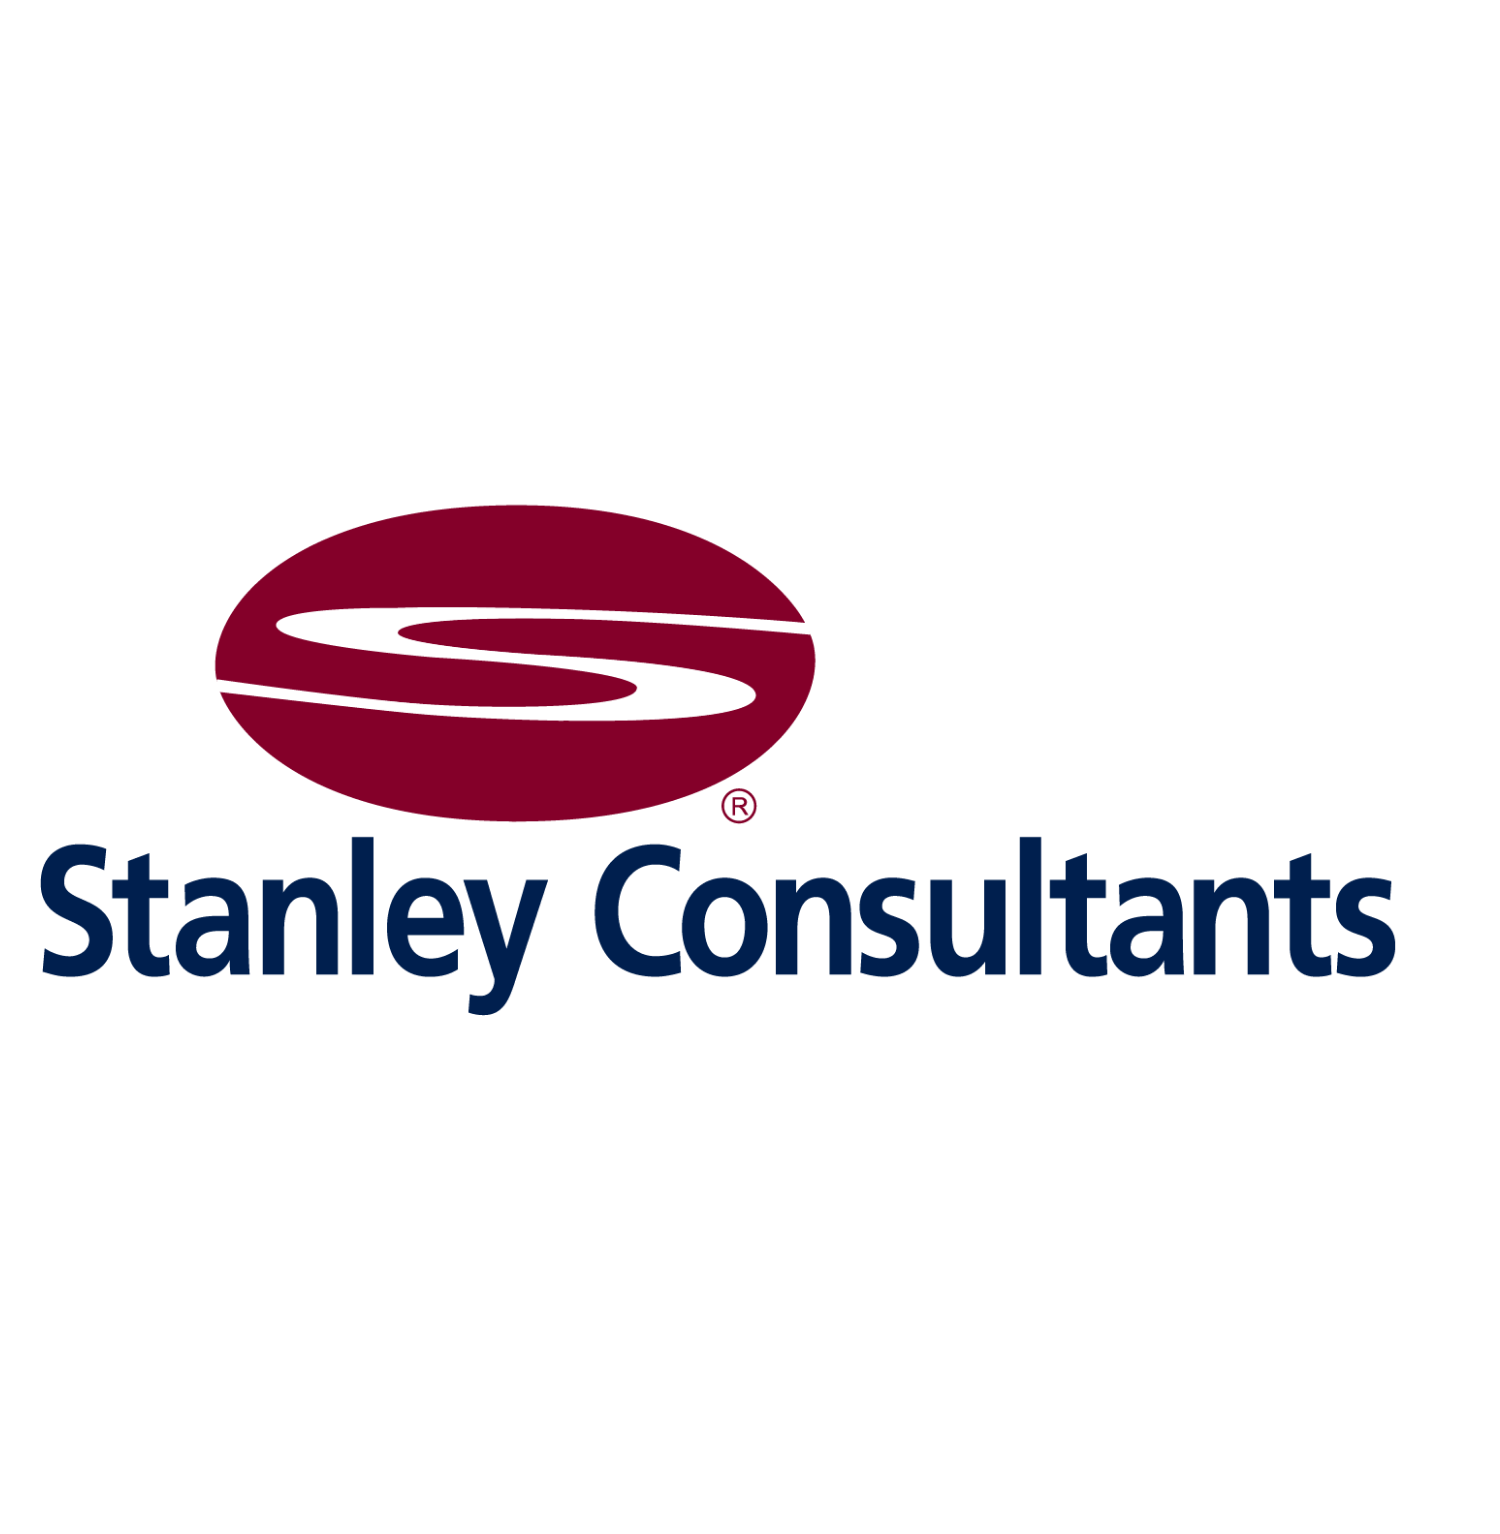 MID-SIZE - Stanley Consultants-1